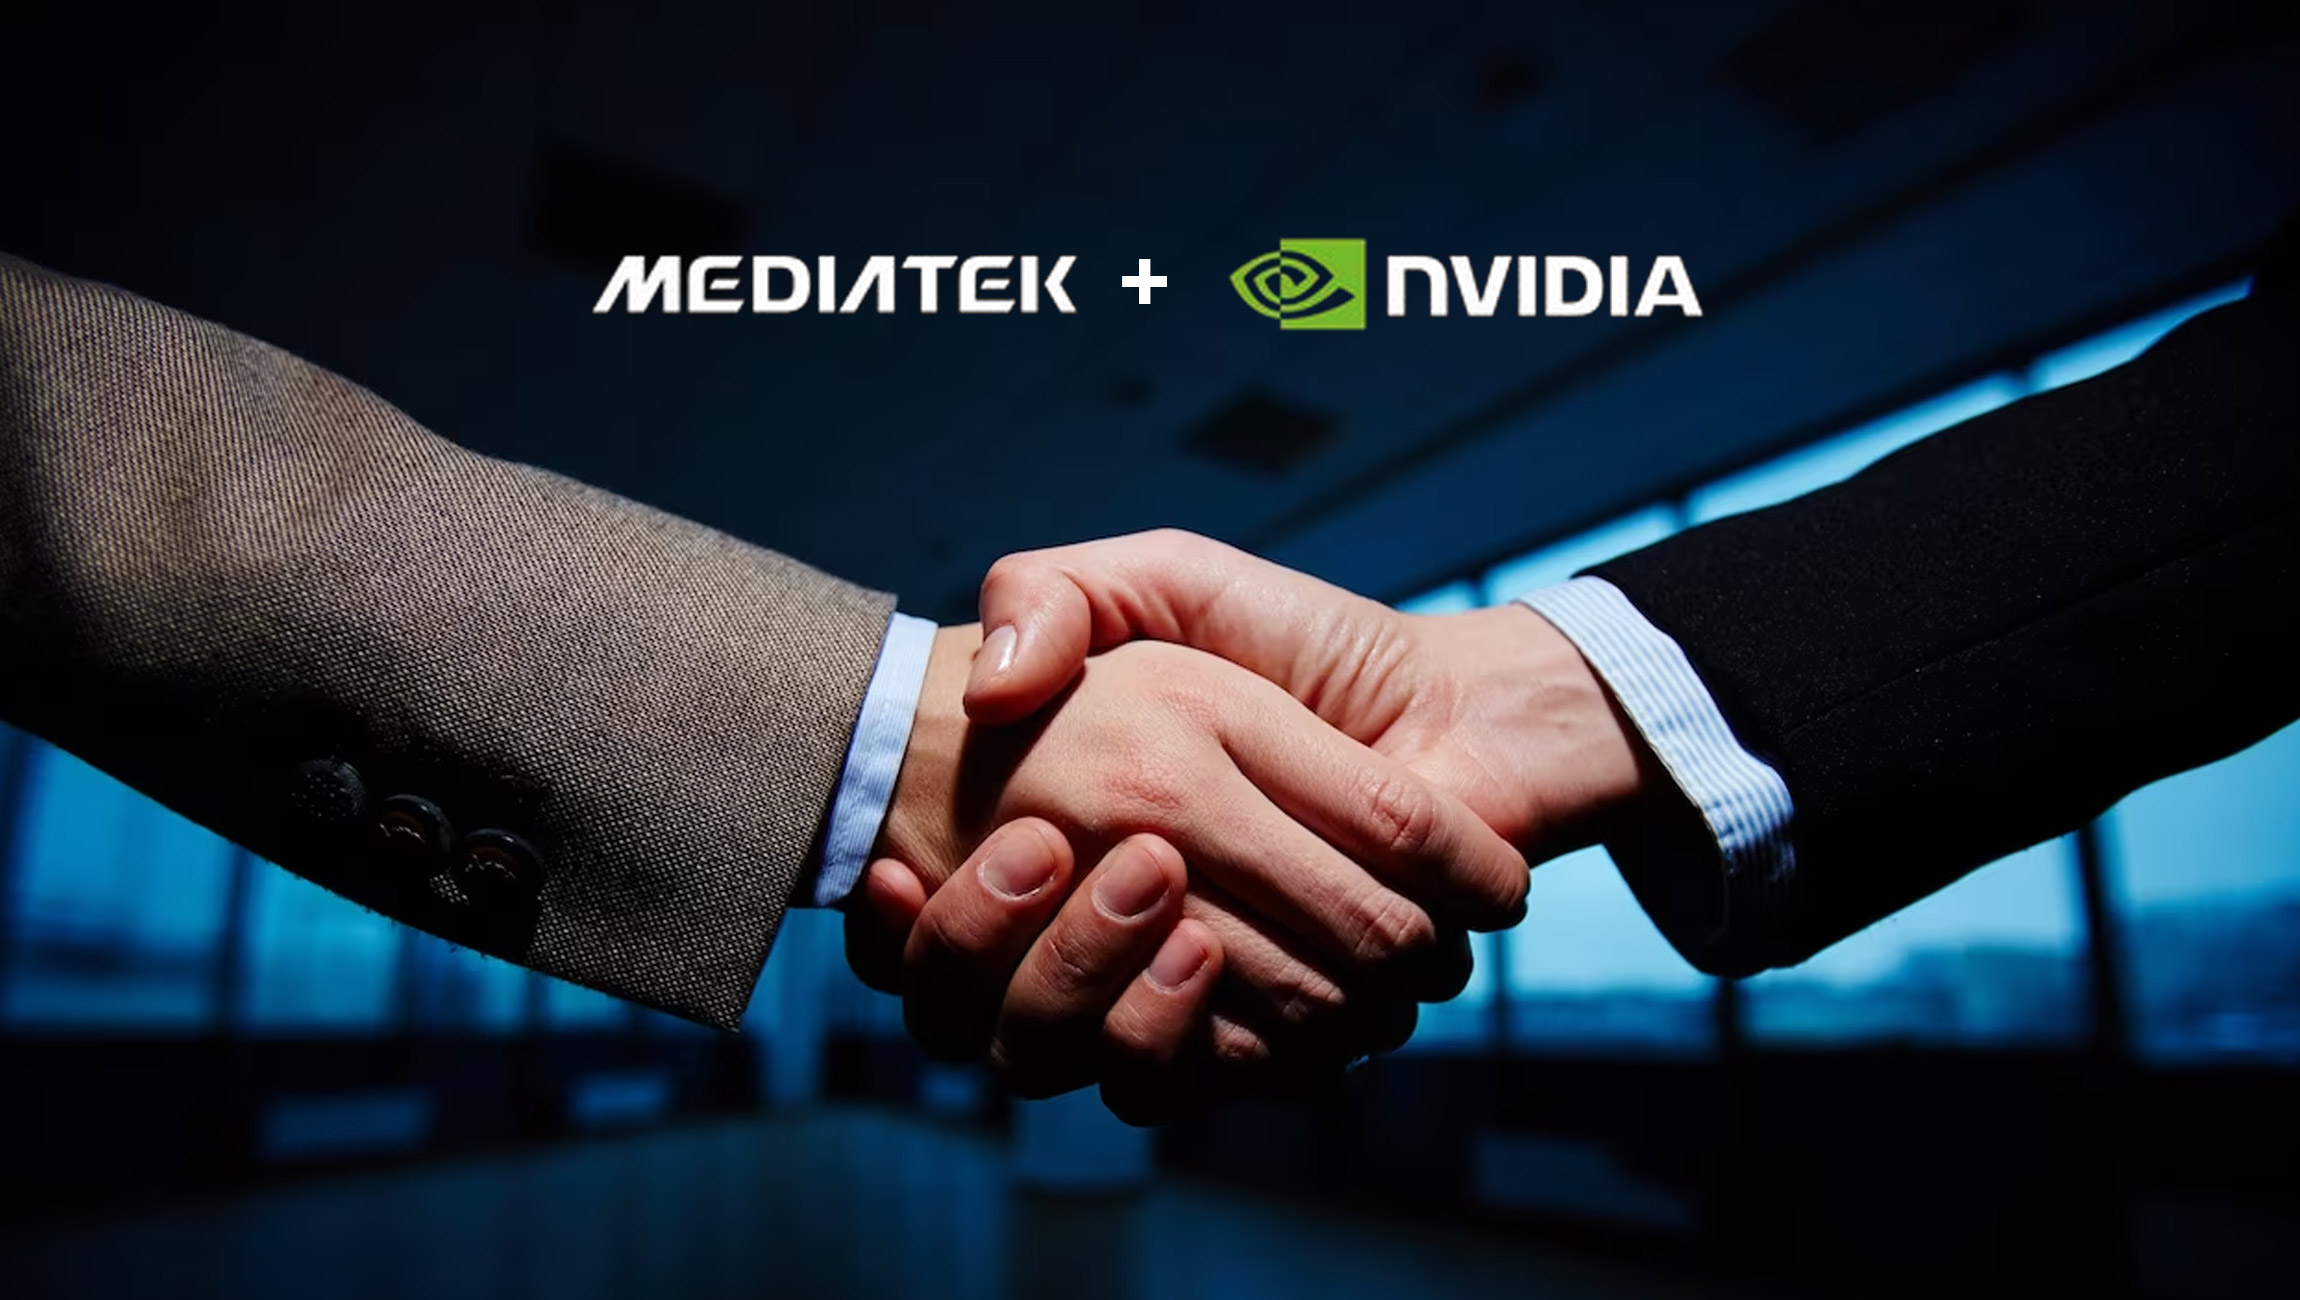 MediaTek Partners With NVIDIA to Provide Full-Scale Product